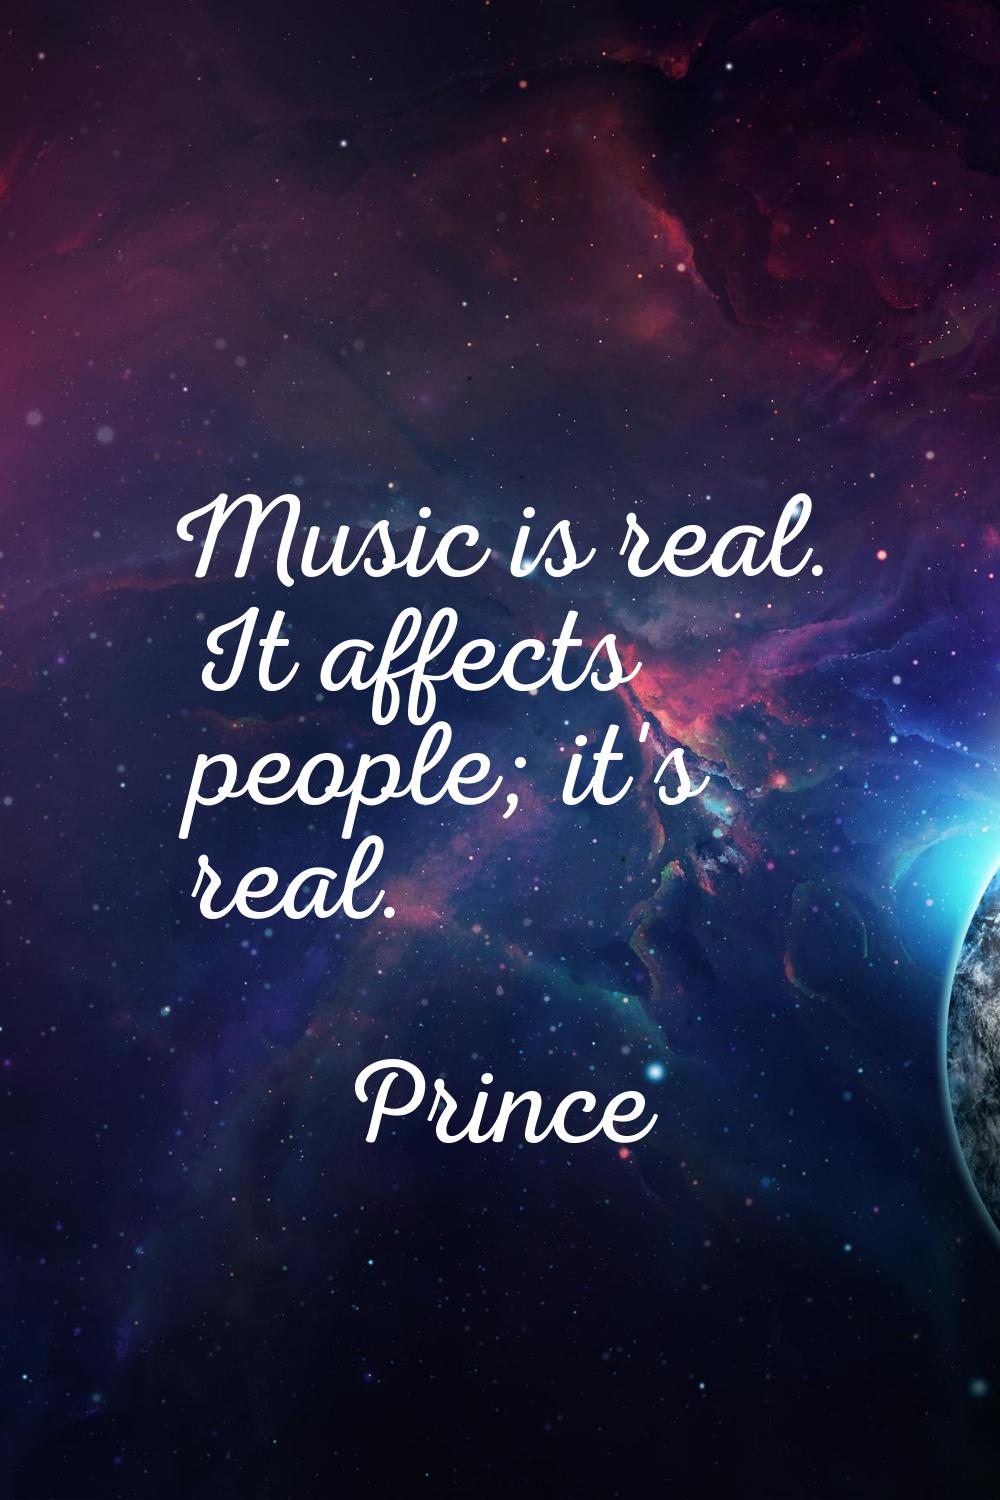 Music is real. It affects people; it's real.